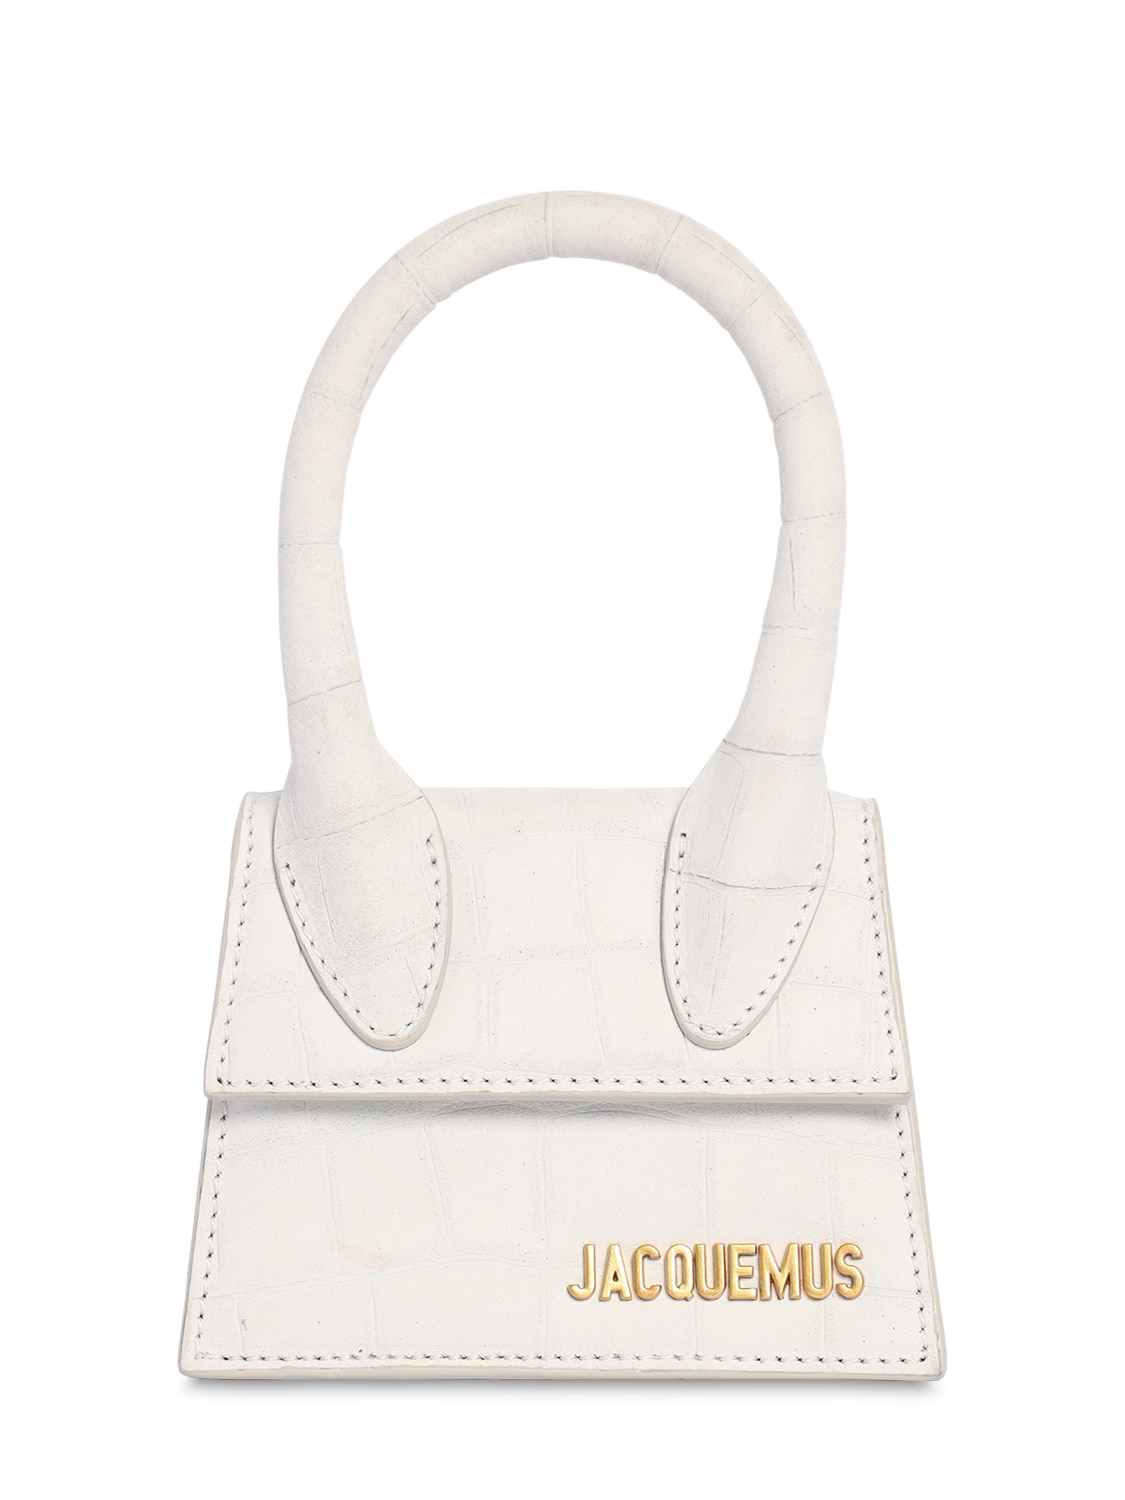 Jacquemus Le Chiquito Croc Embossed Leather Bag In White